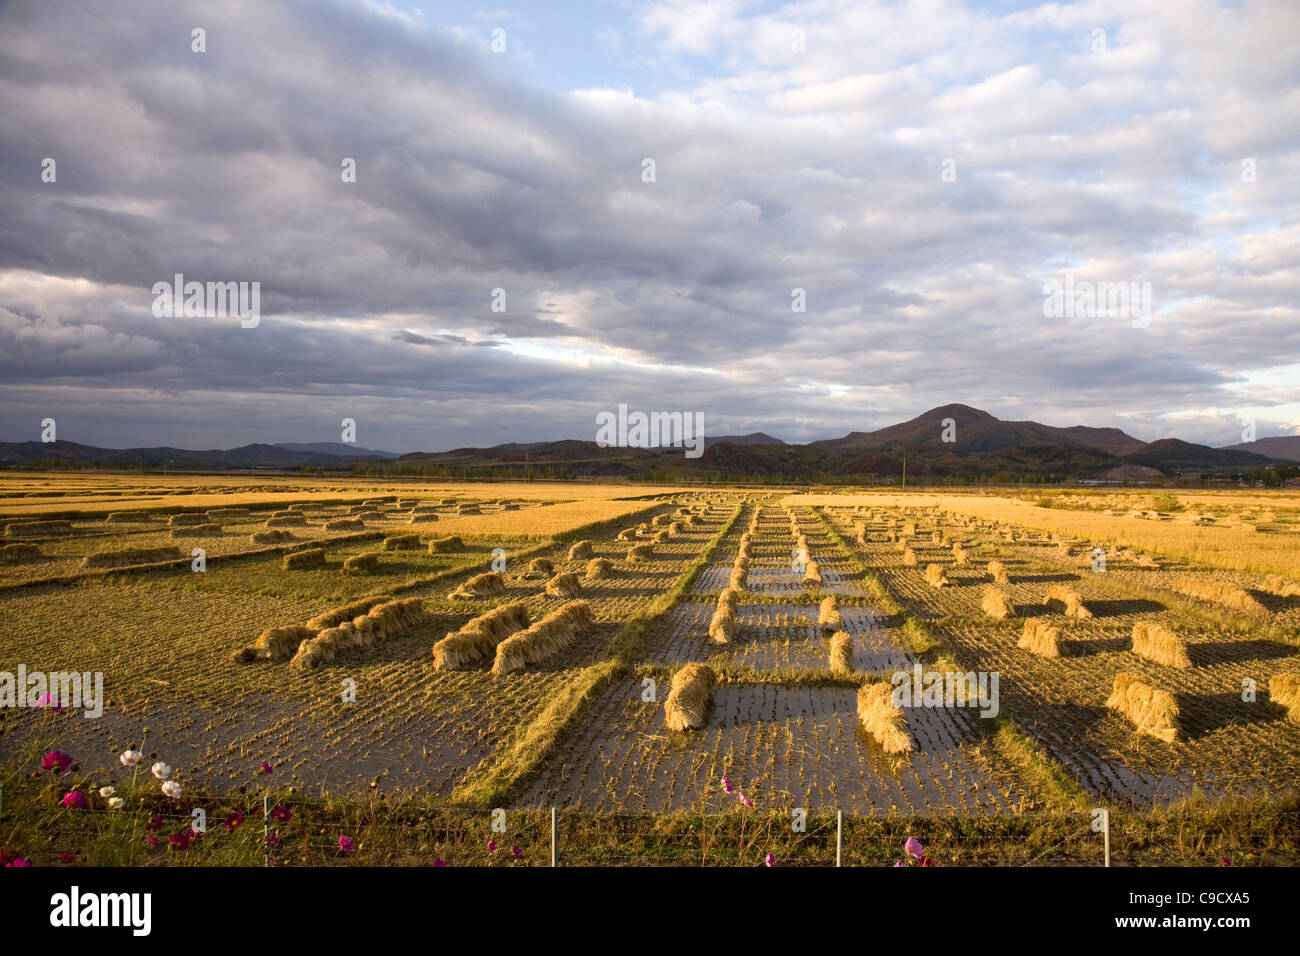 Harvest cropland under cloudy sky in autumn Stock Photo